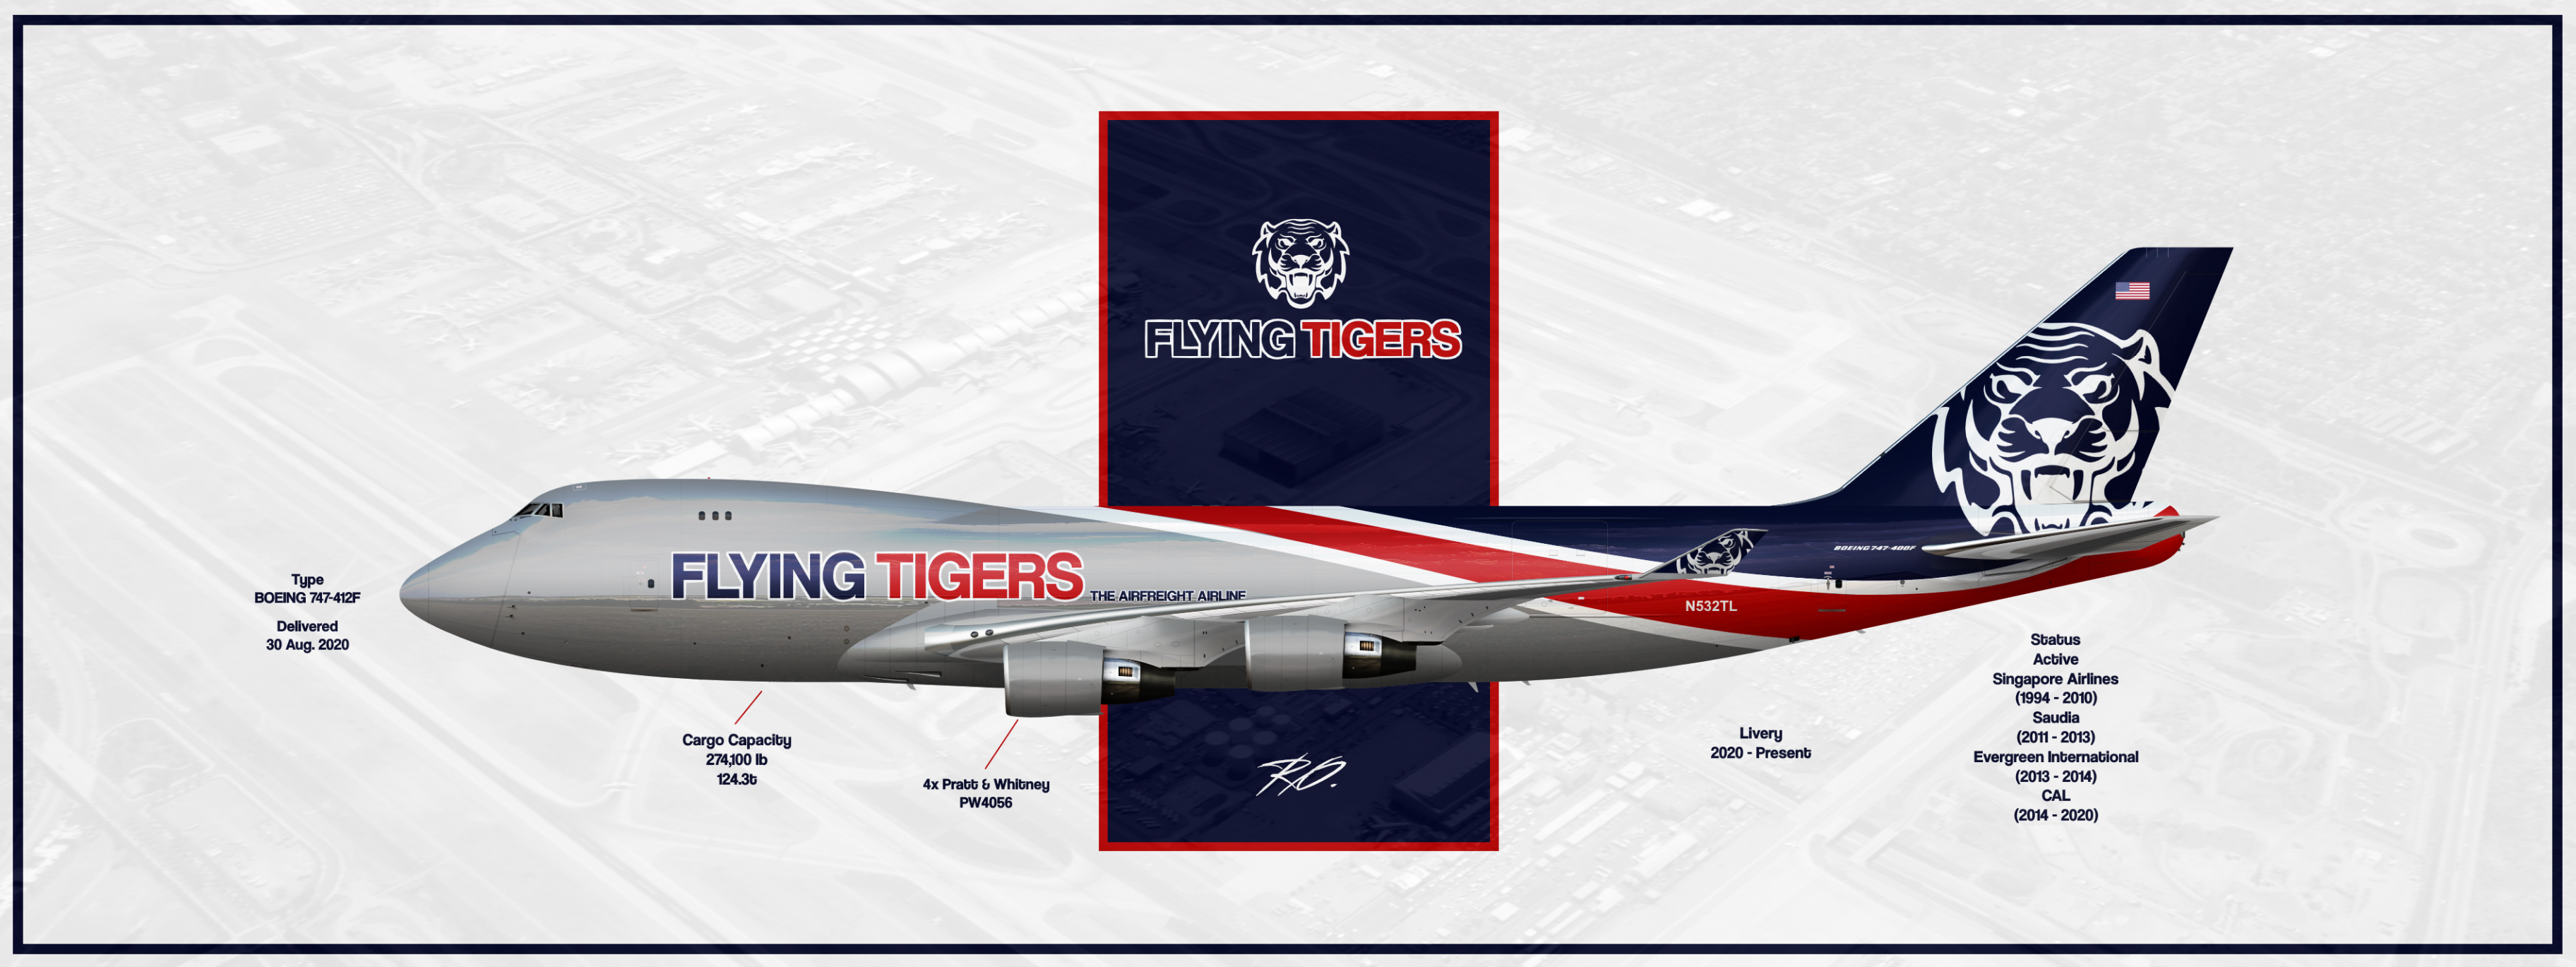 Flying Tiger Line | Boeing 747-400F - S P H E R E - Gallery - Airline  Empires